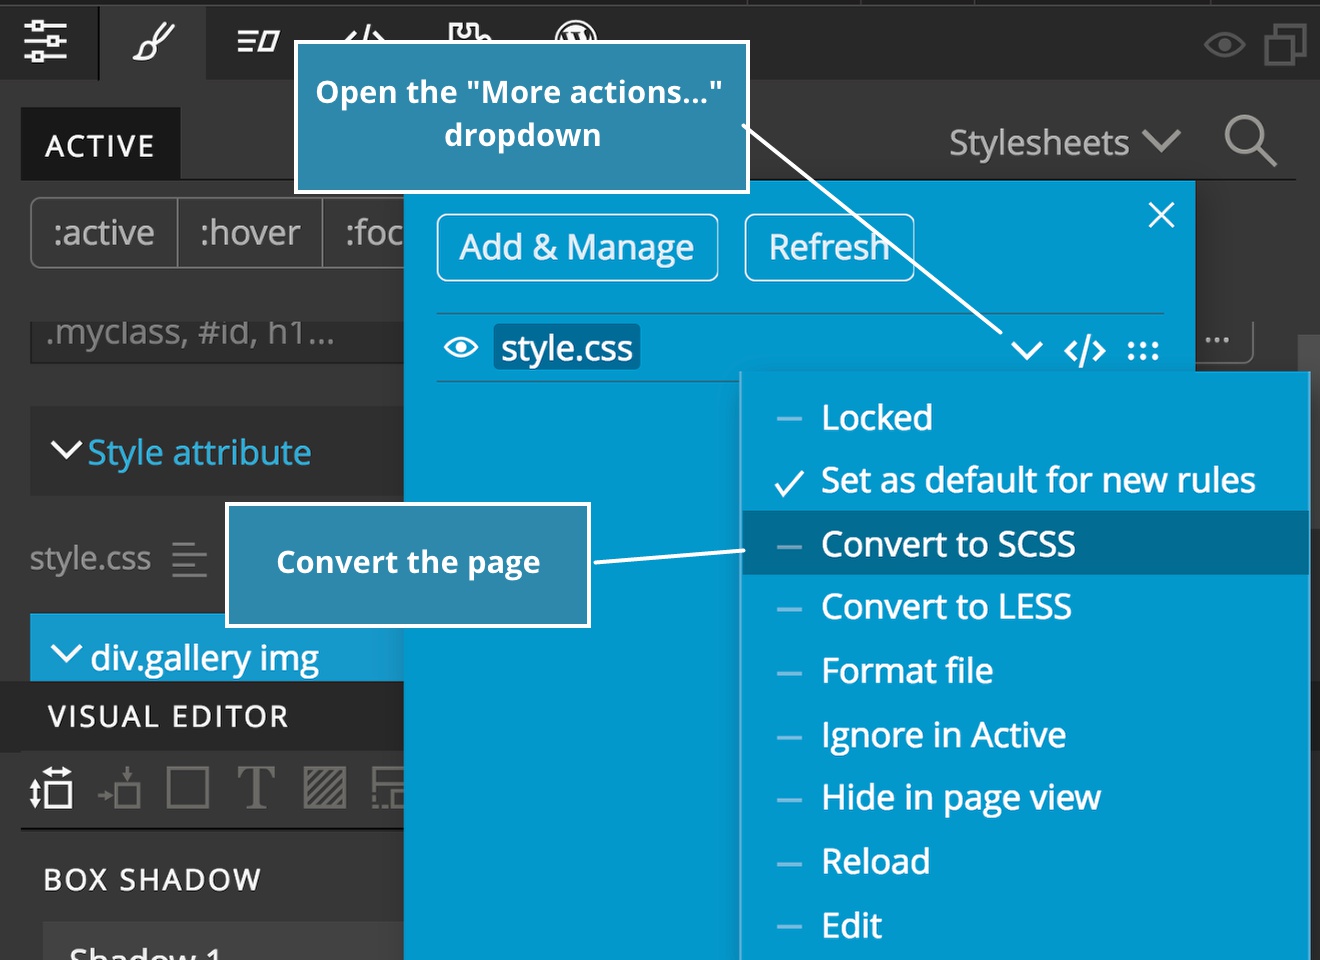 Screenshot of the "More actions..." dropdown and how to convert the stylesheet.